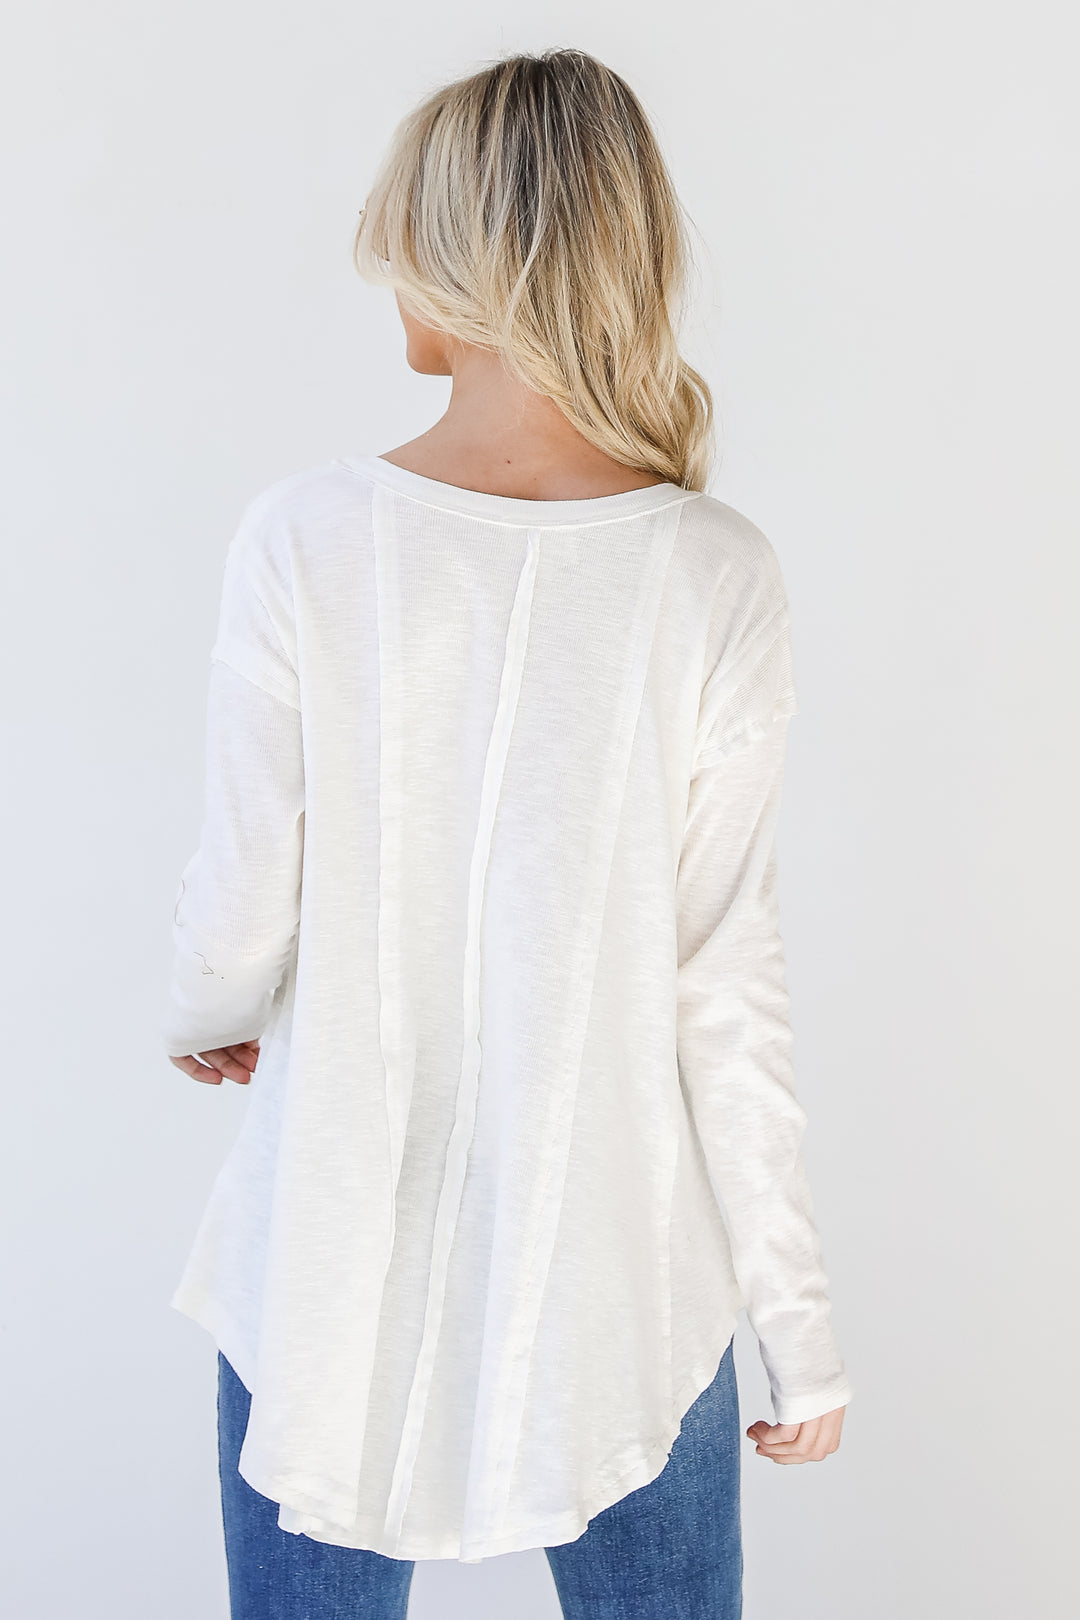 Knit Top in ivory back view